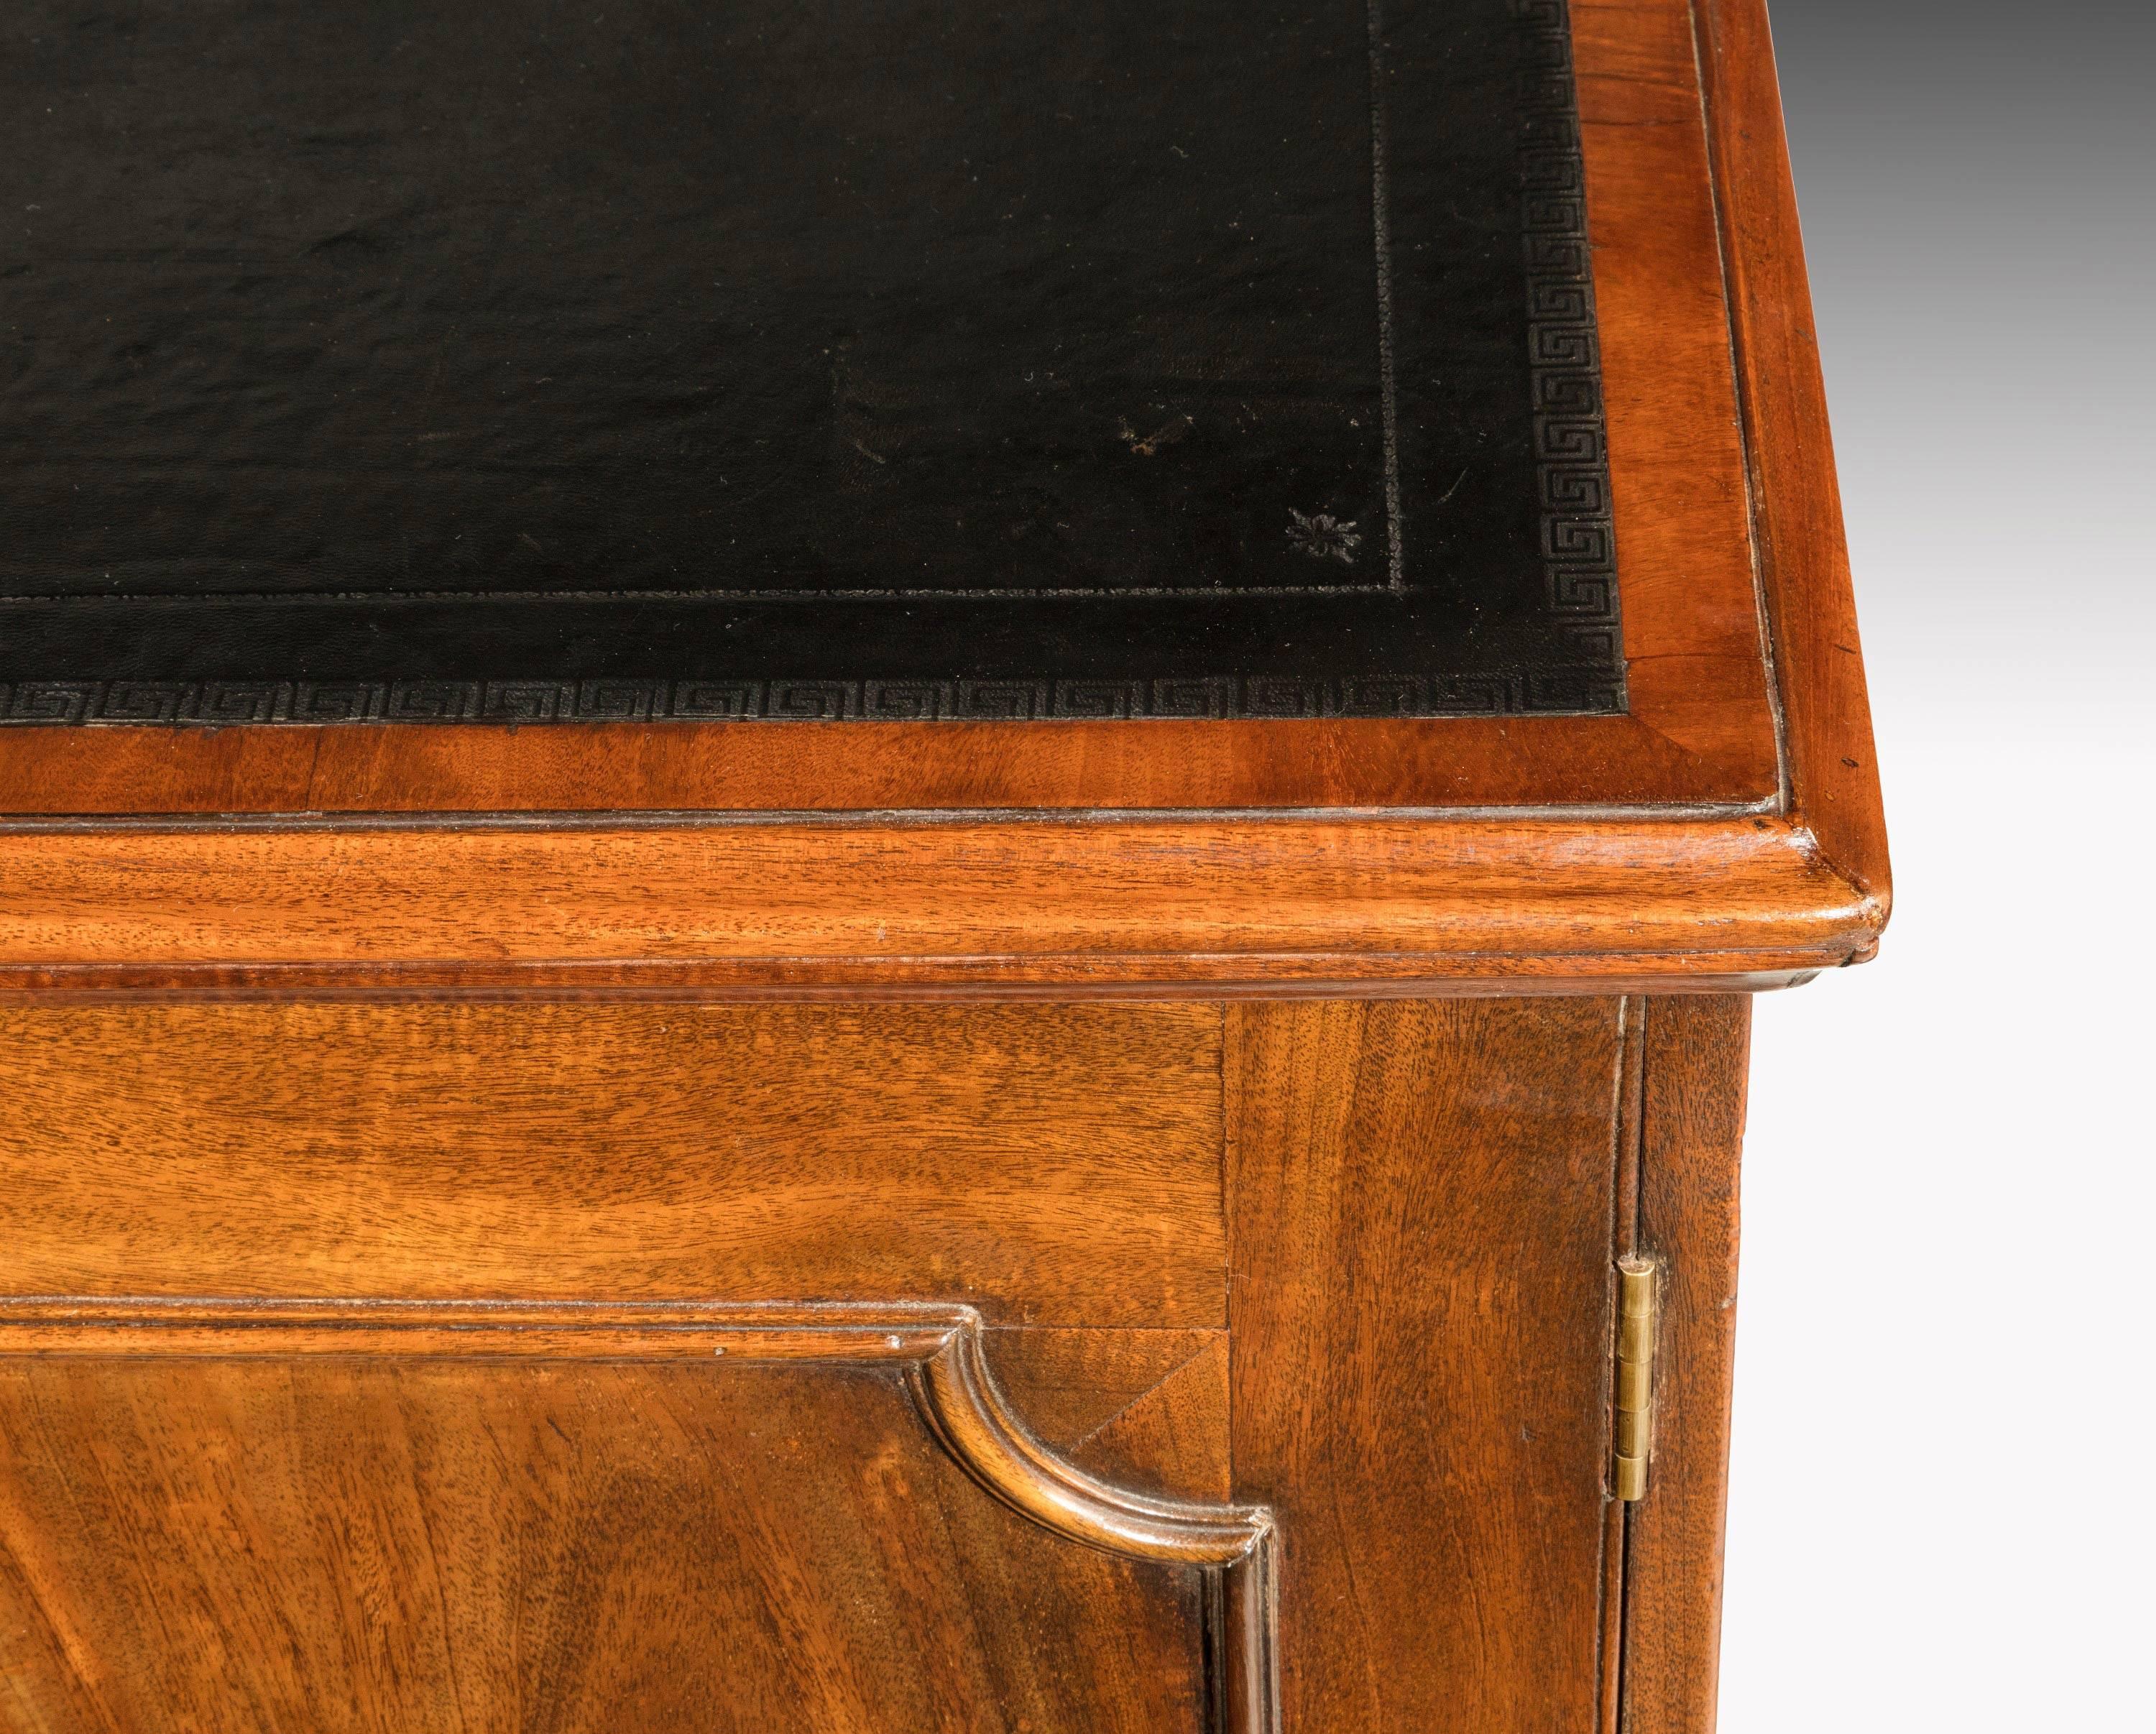 Chippendale Period Mahogany Desk of Unusual Form with Blind Drawers 4